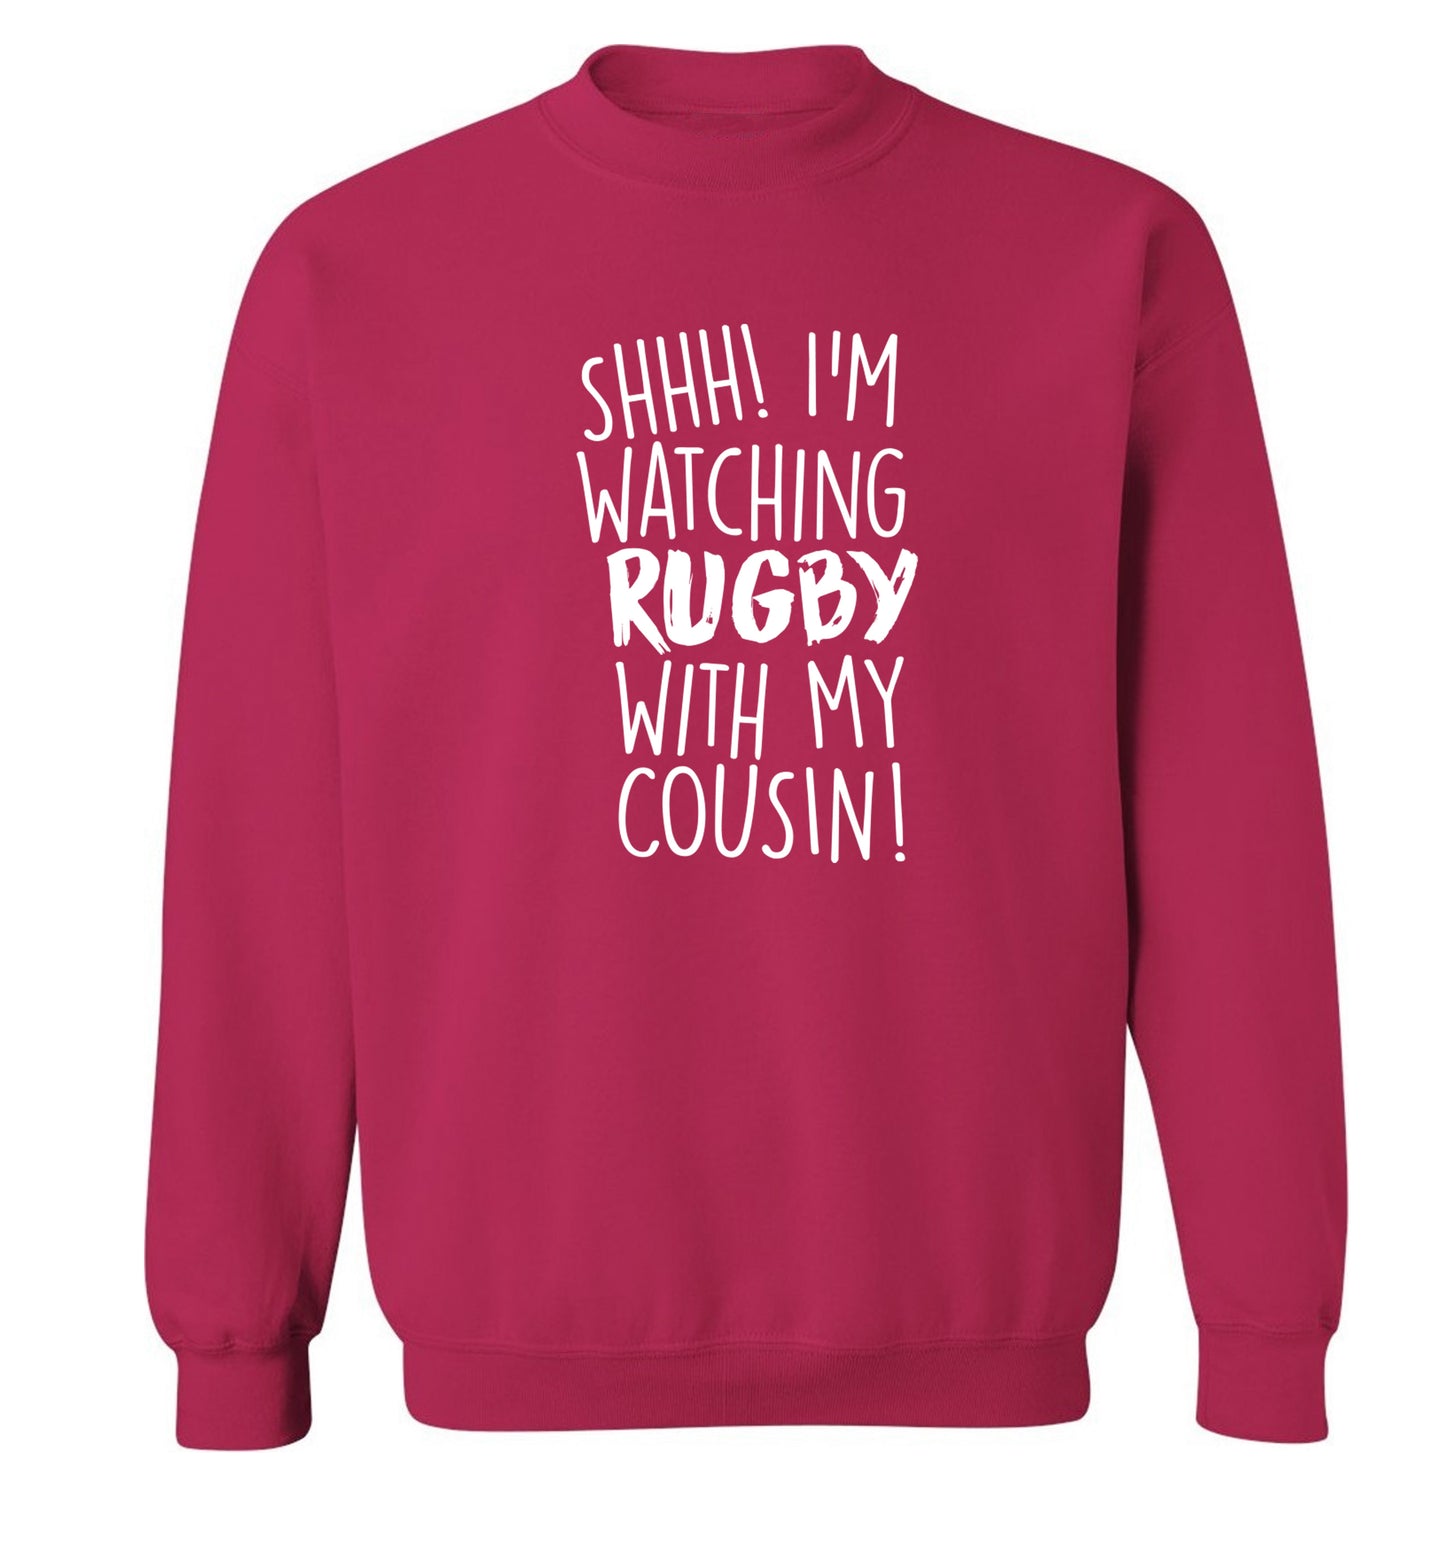 Shhh I'm watching rugby with my cousin Adult's unisex pink Sweater 2XL